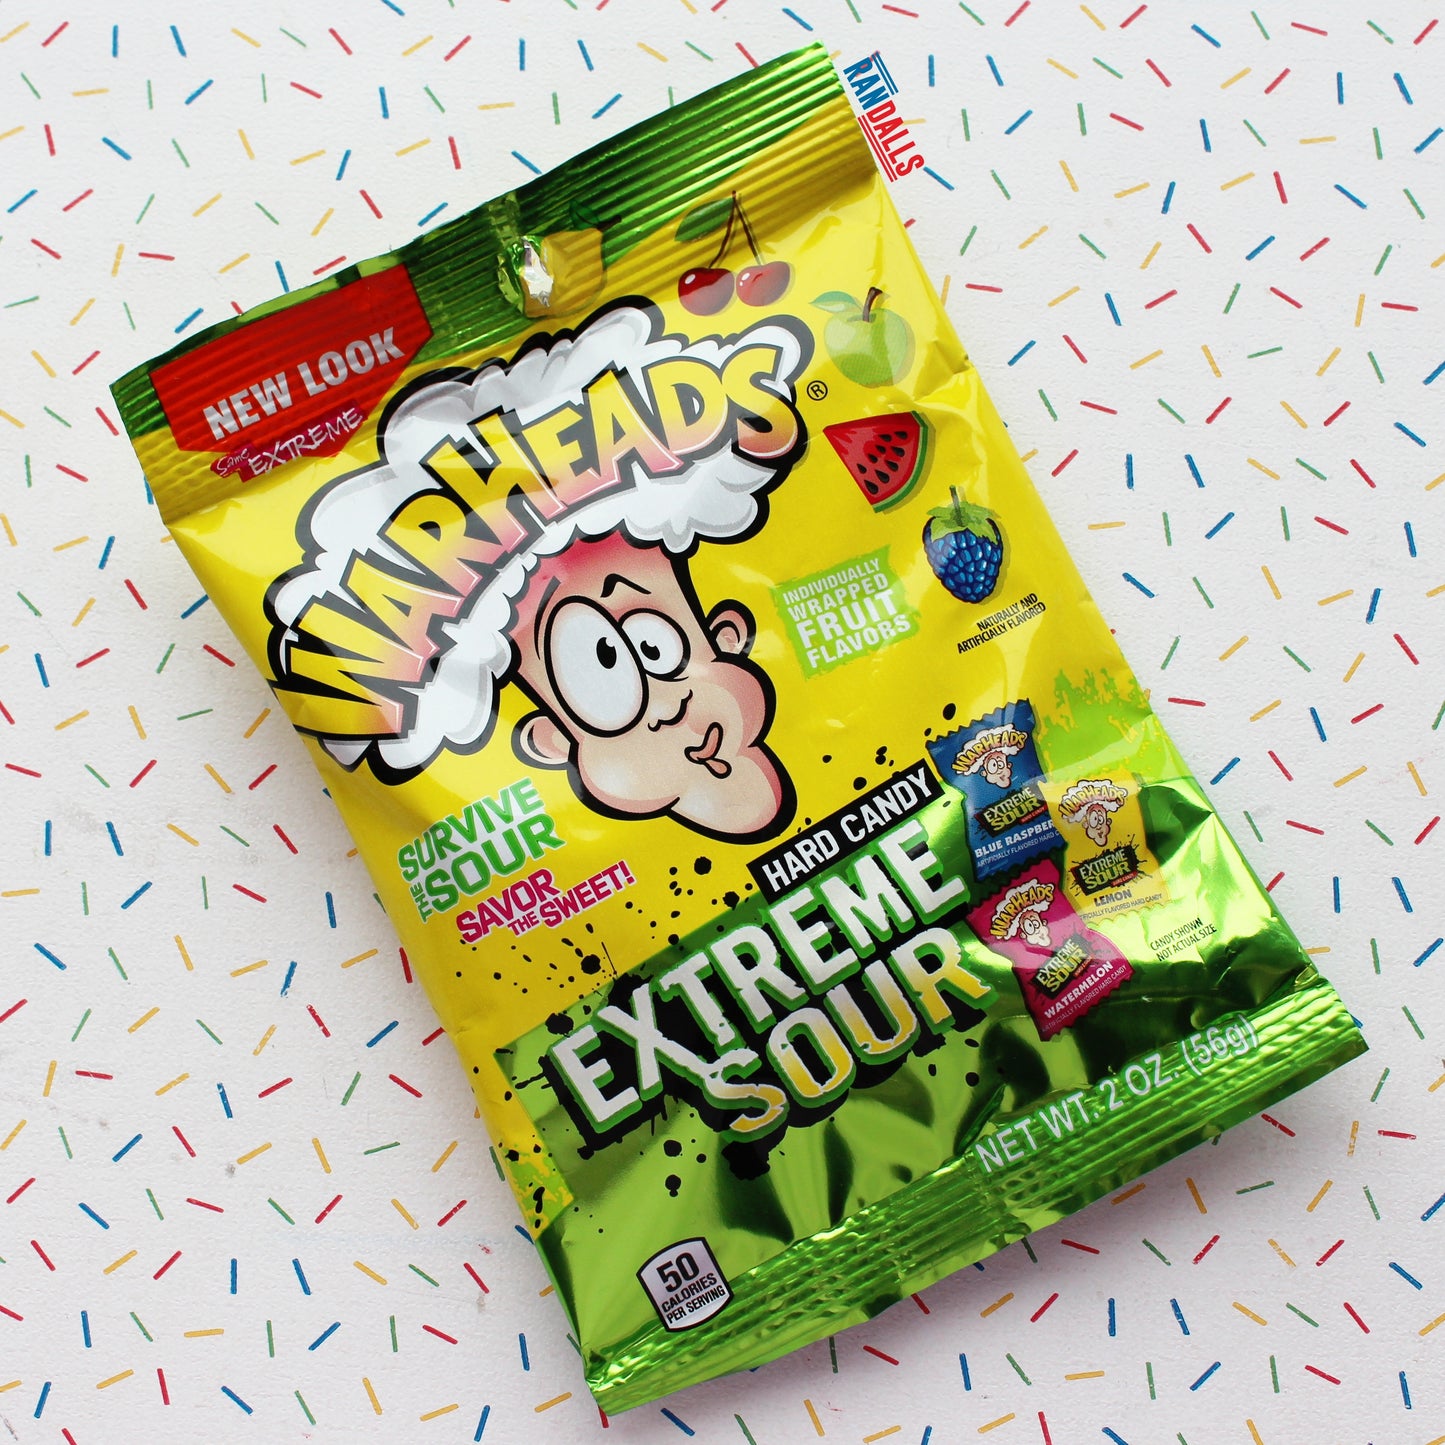 warheads super sour, warheads extreme sour, miniature candy, miniature american candy, miniature, bite size sweets, sour candy, small sweets, american candy, randalls,